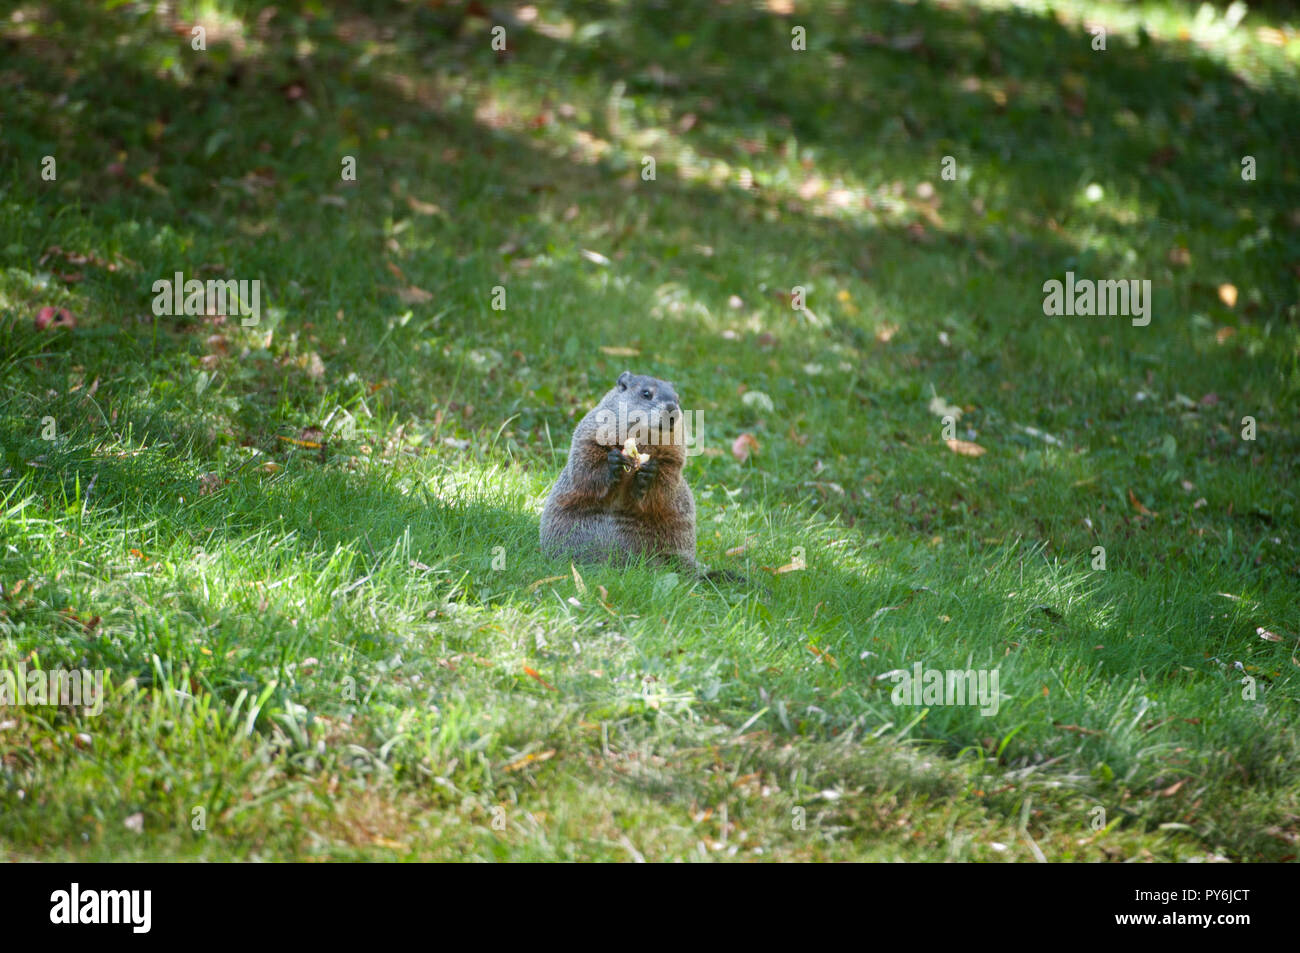 A groundhog or woodchuck eating an apple Stock Photo